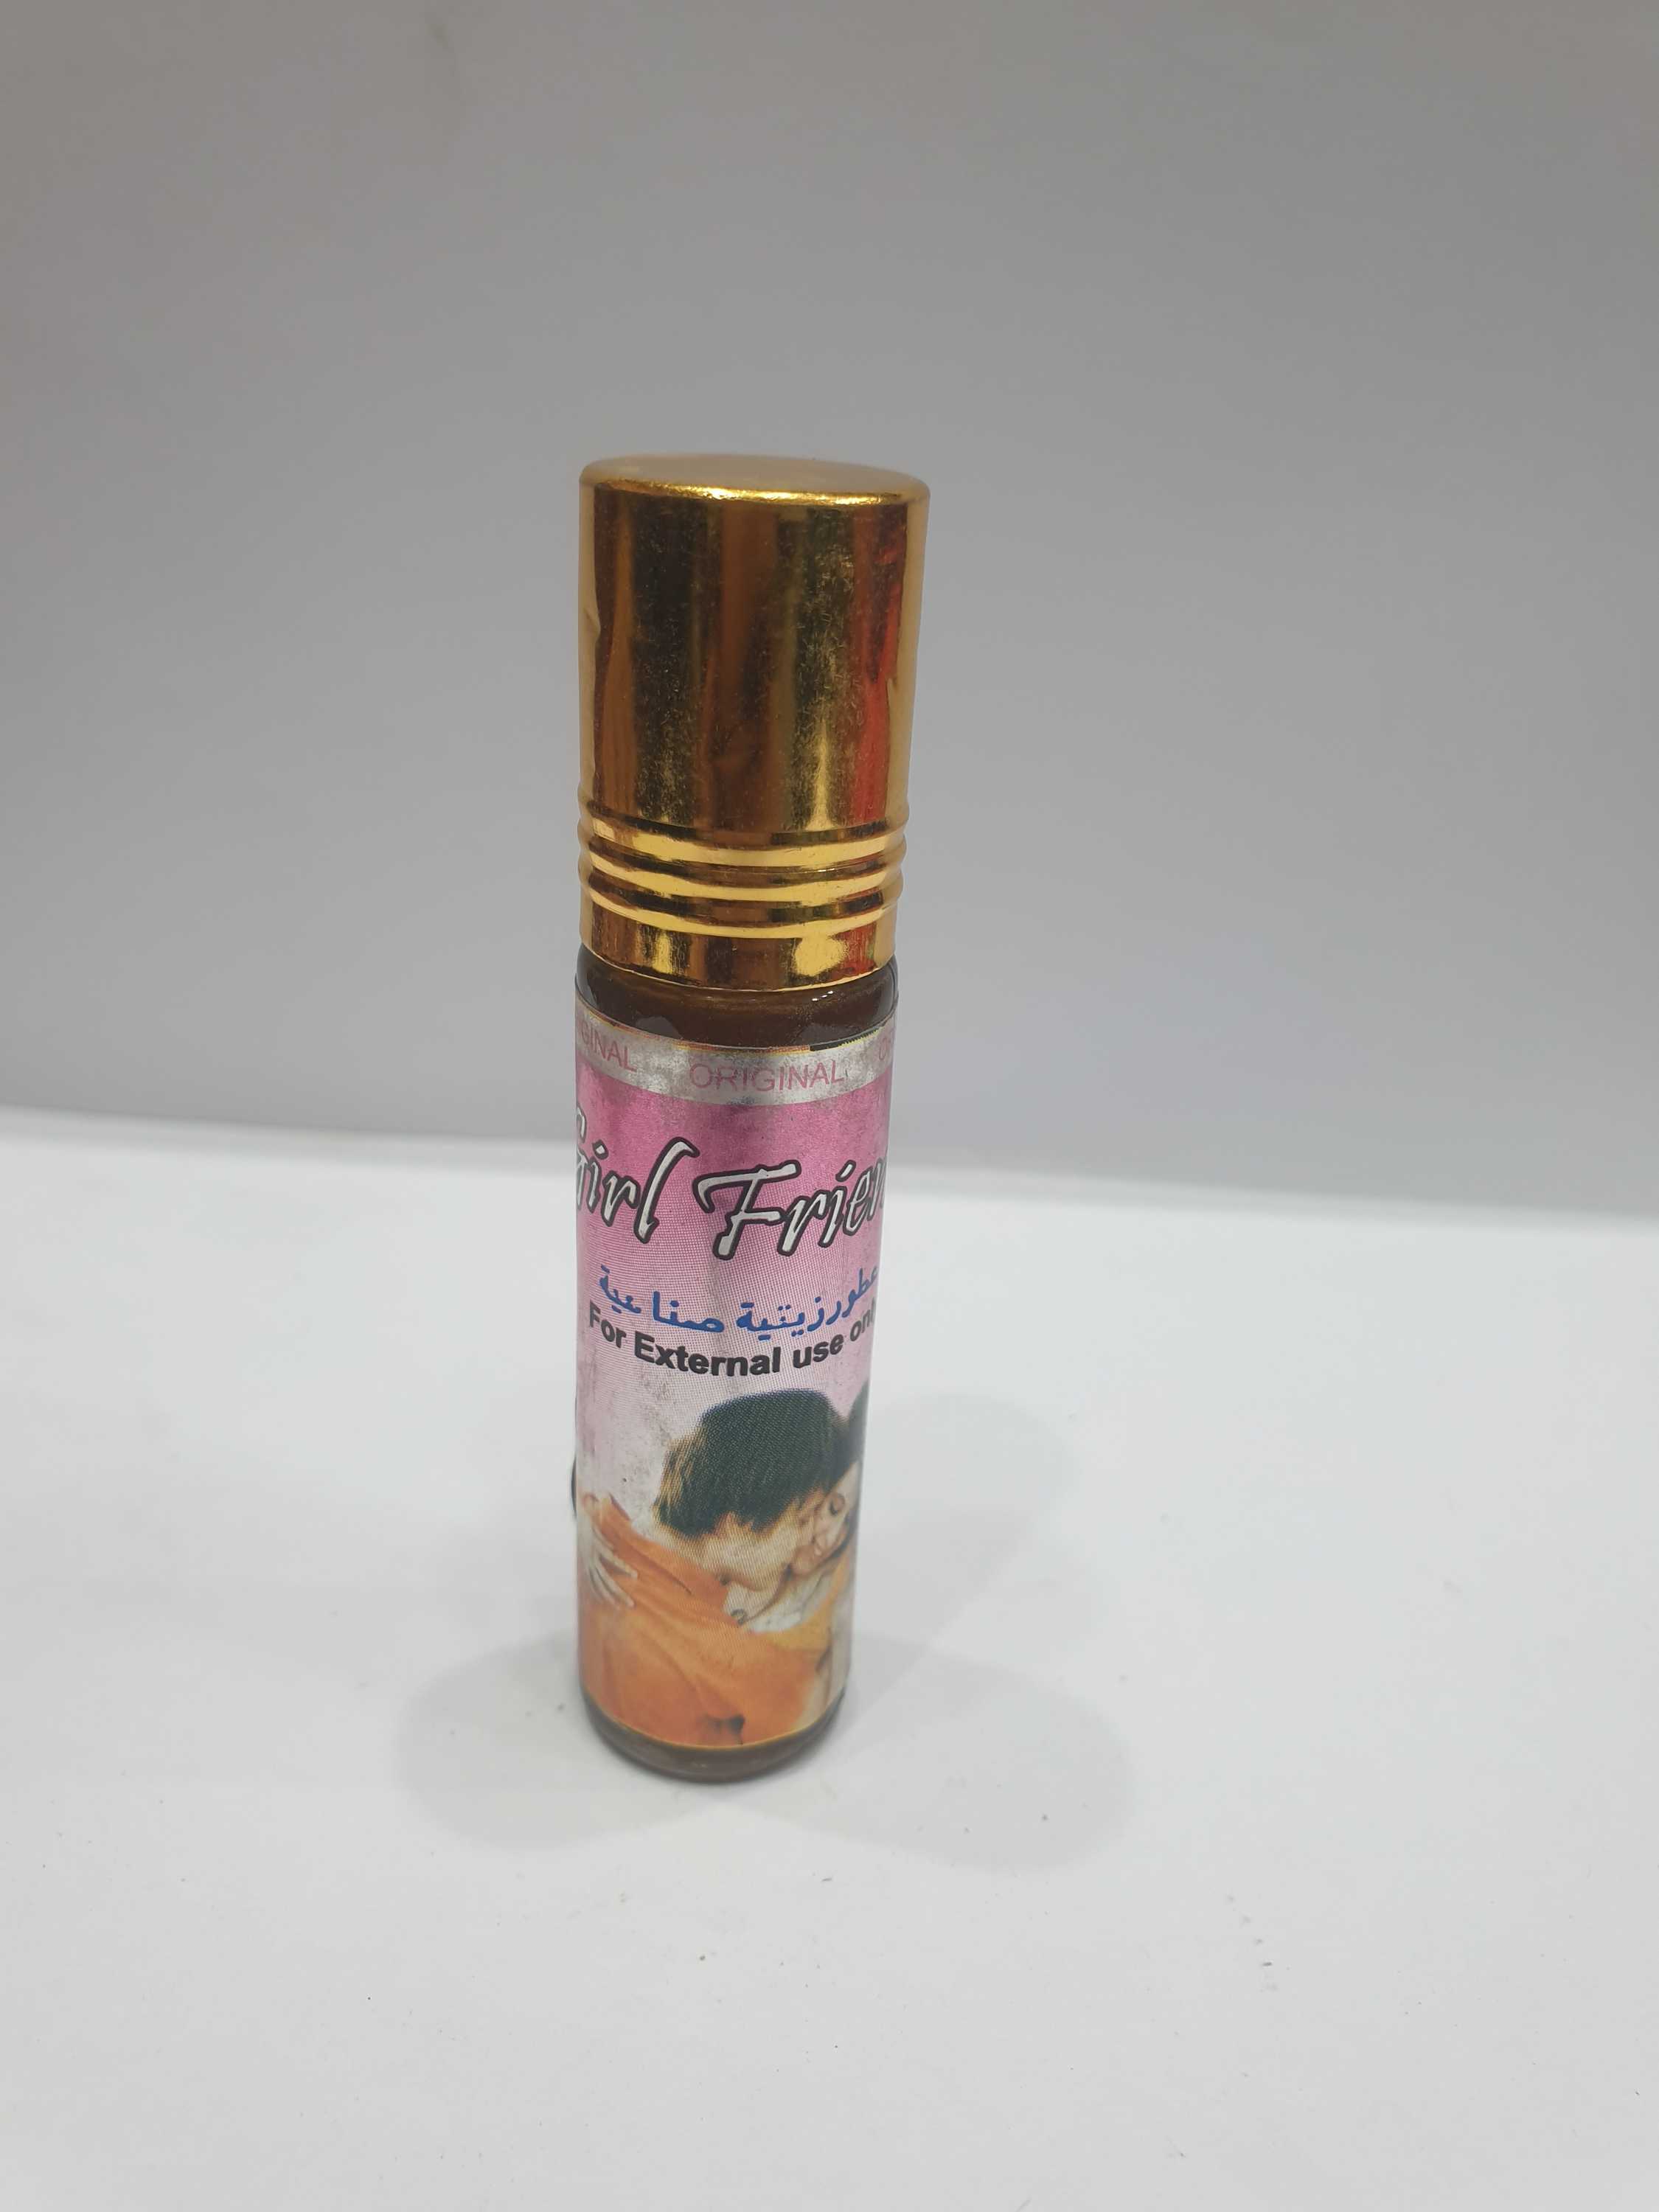 Attar - Handmade Natural Perfume Form Herbal Extract, girl Friend, 6ml, roll On